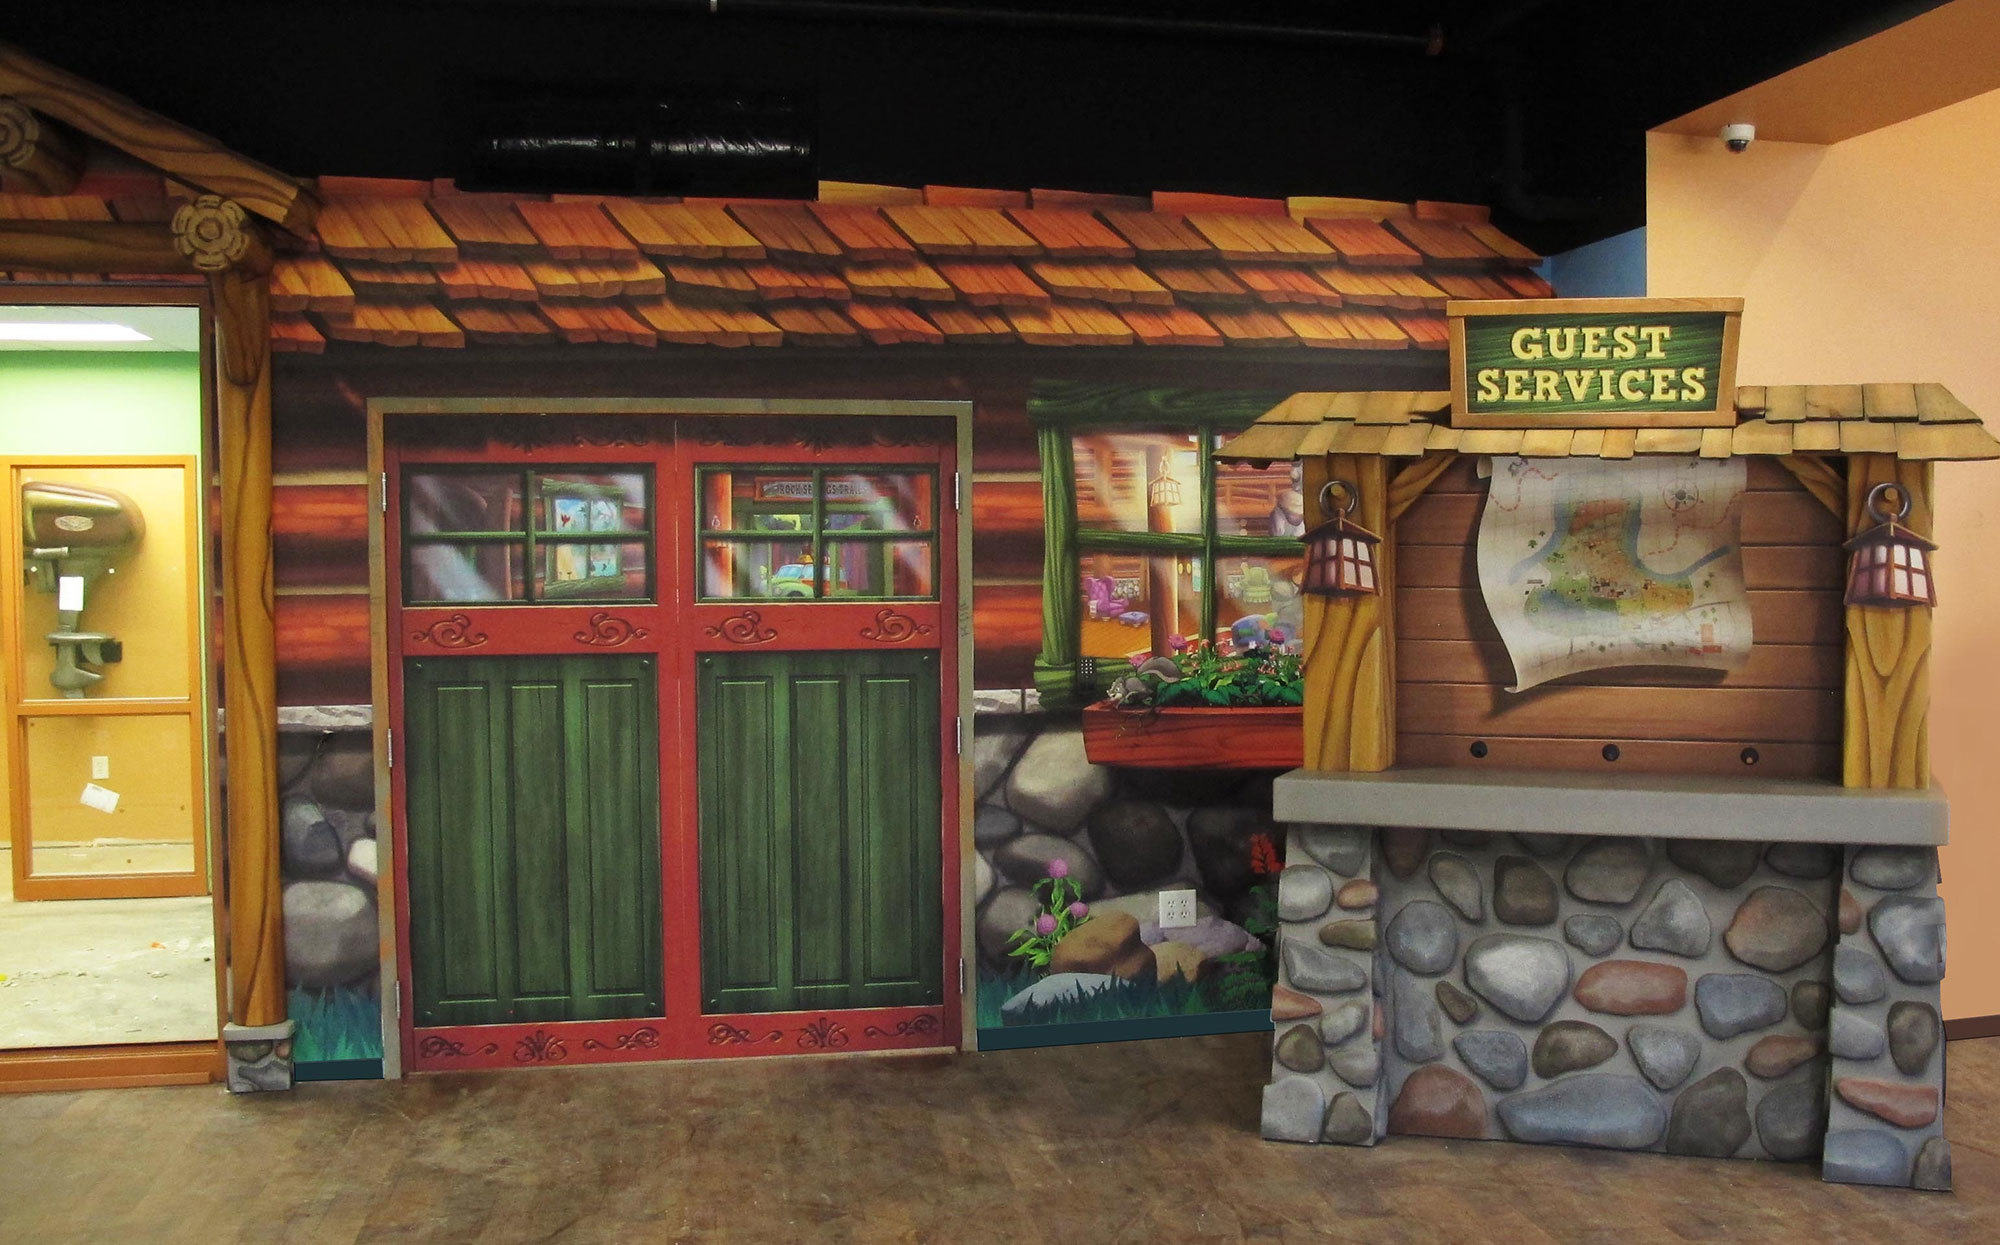 Camping Themed Facade of a lodge with double doors and a window plus a 3D sculpted rock and wood check in kiosk with sign reading "Guest Services" at a Church